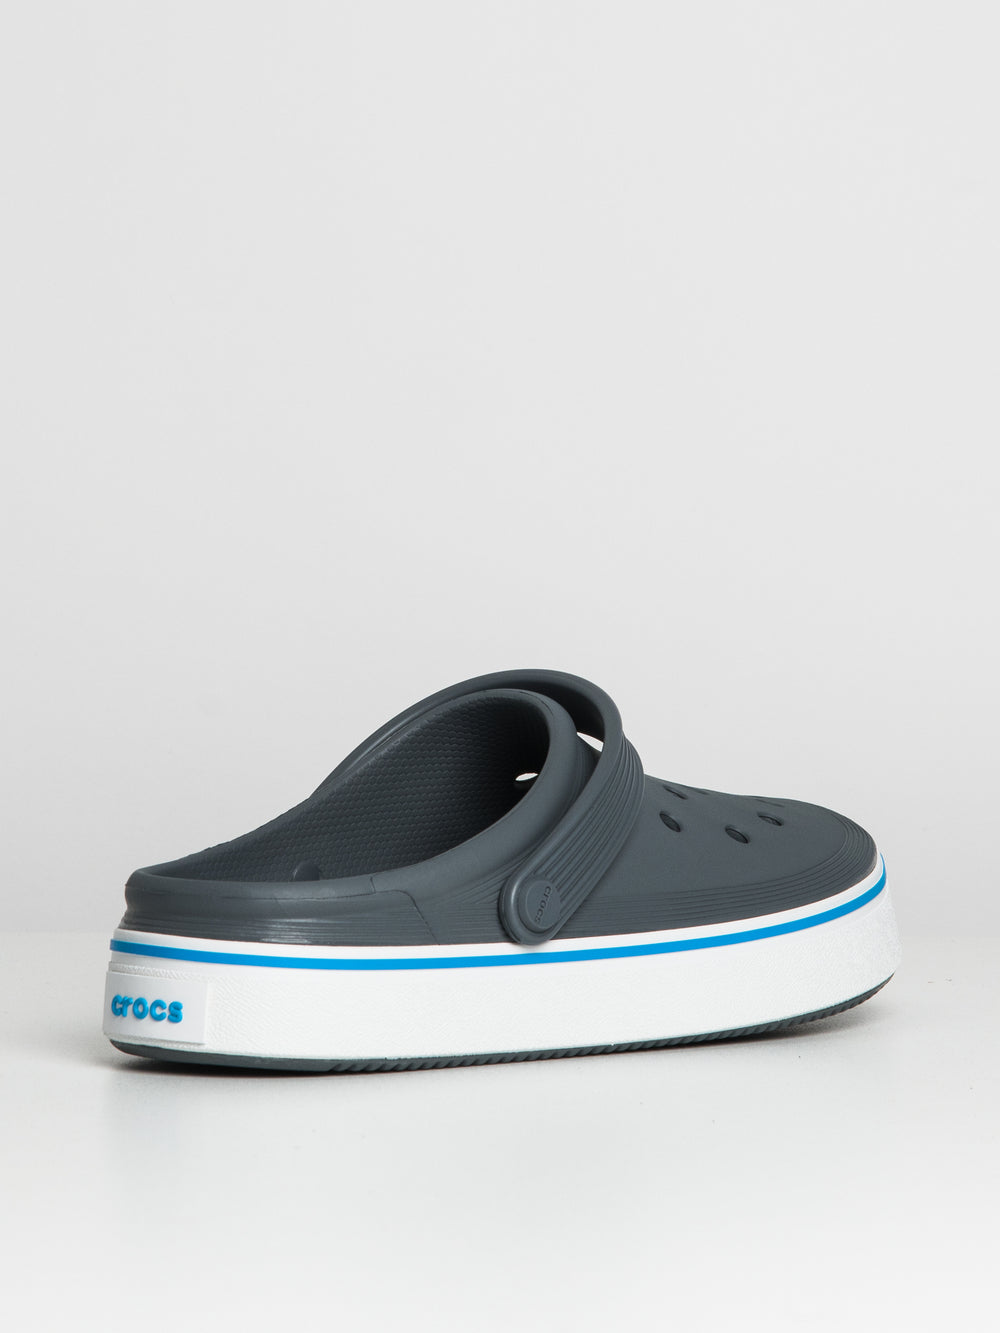 CLEAN CLOG CROCS CROCBAND | MENS Collective Footwear Boathouse